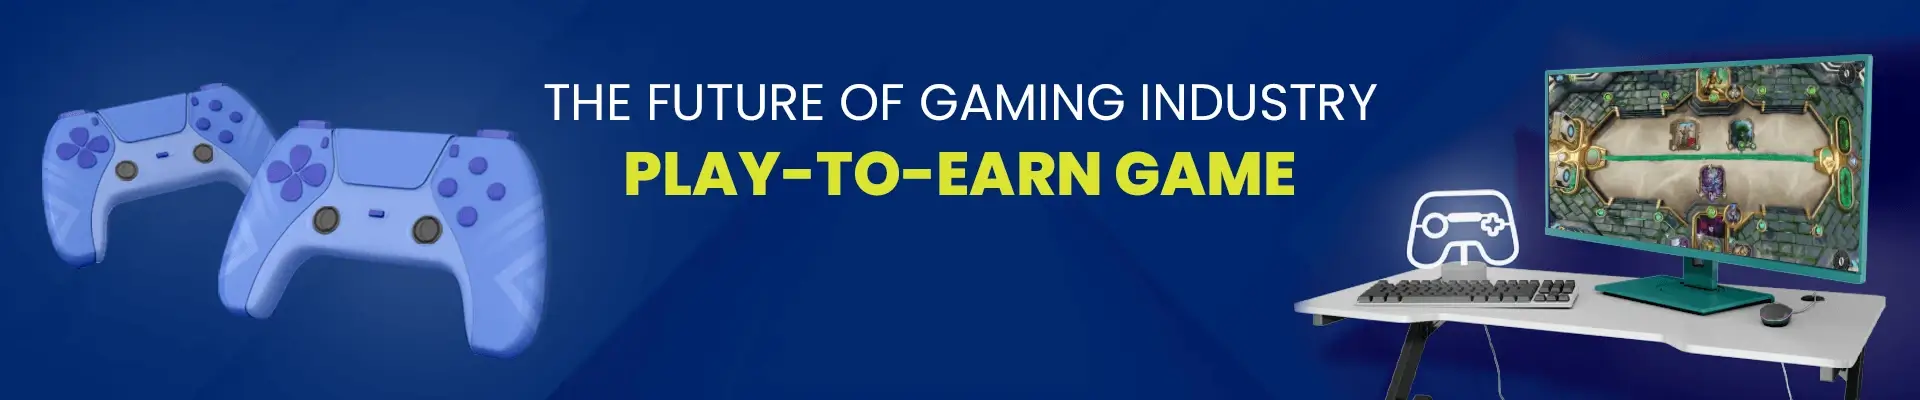 The Future of Gaming Industry: Play-To-Earn Game